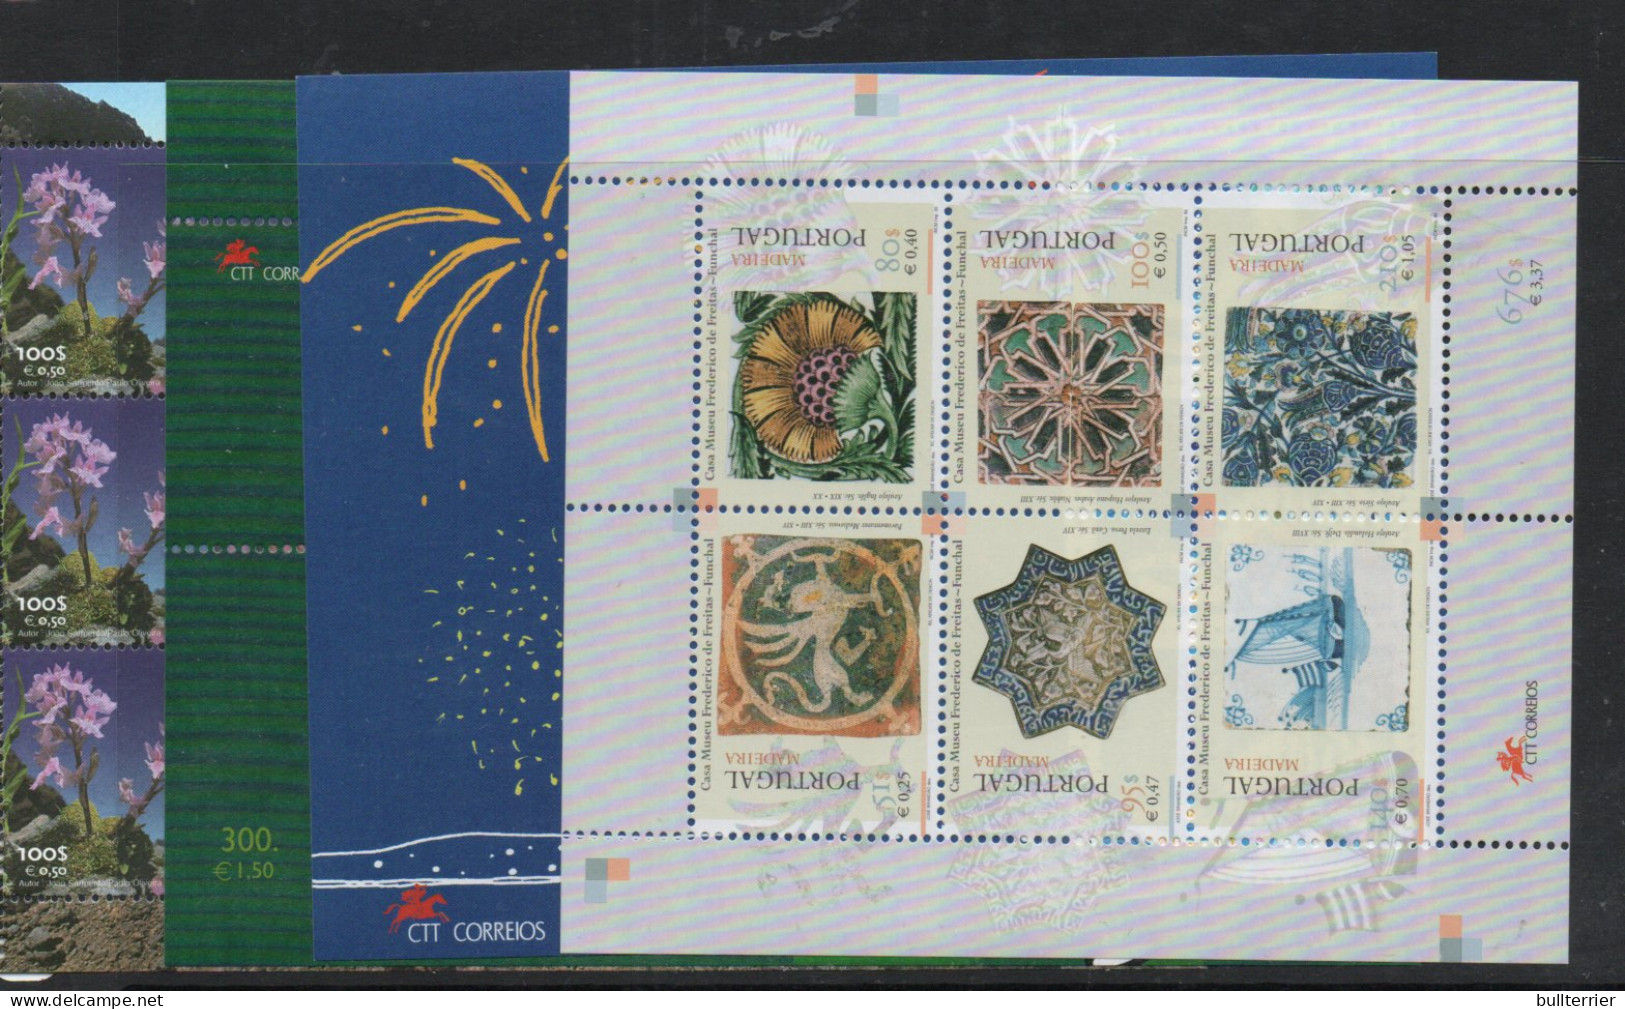 MADEIRA - COLLECTION OF 37   S/SHEETS  MINT NEVER HINGED, SG CAT £390 - Madeira